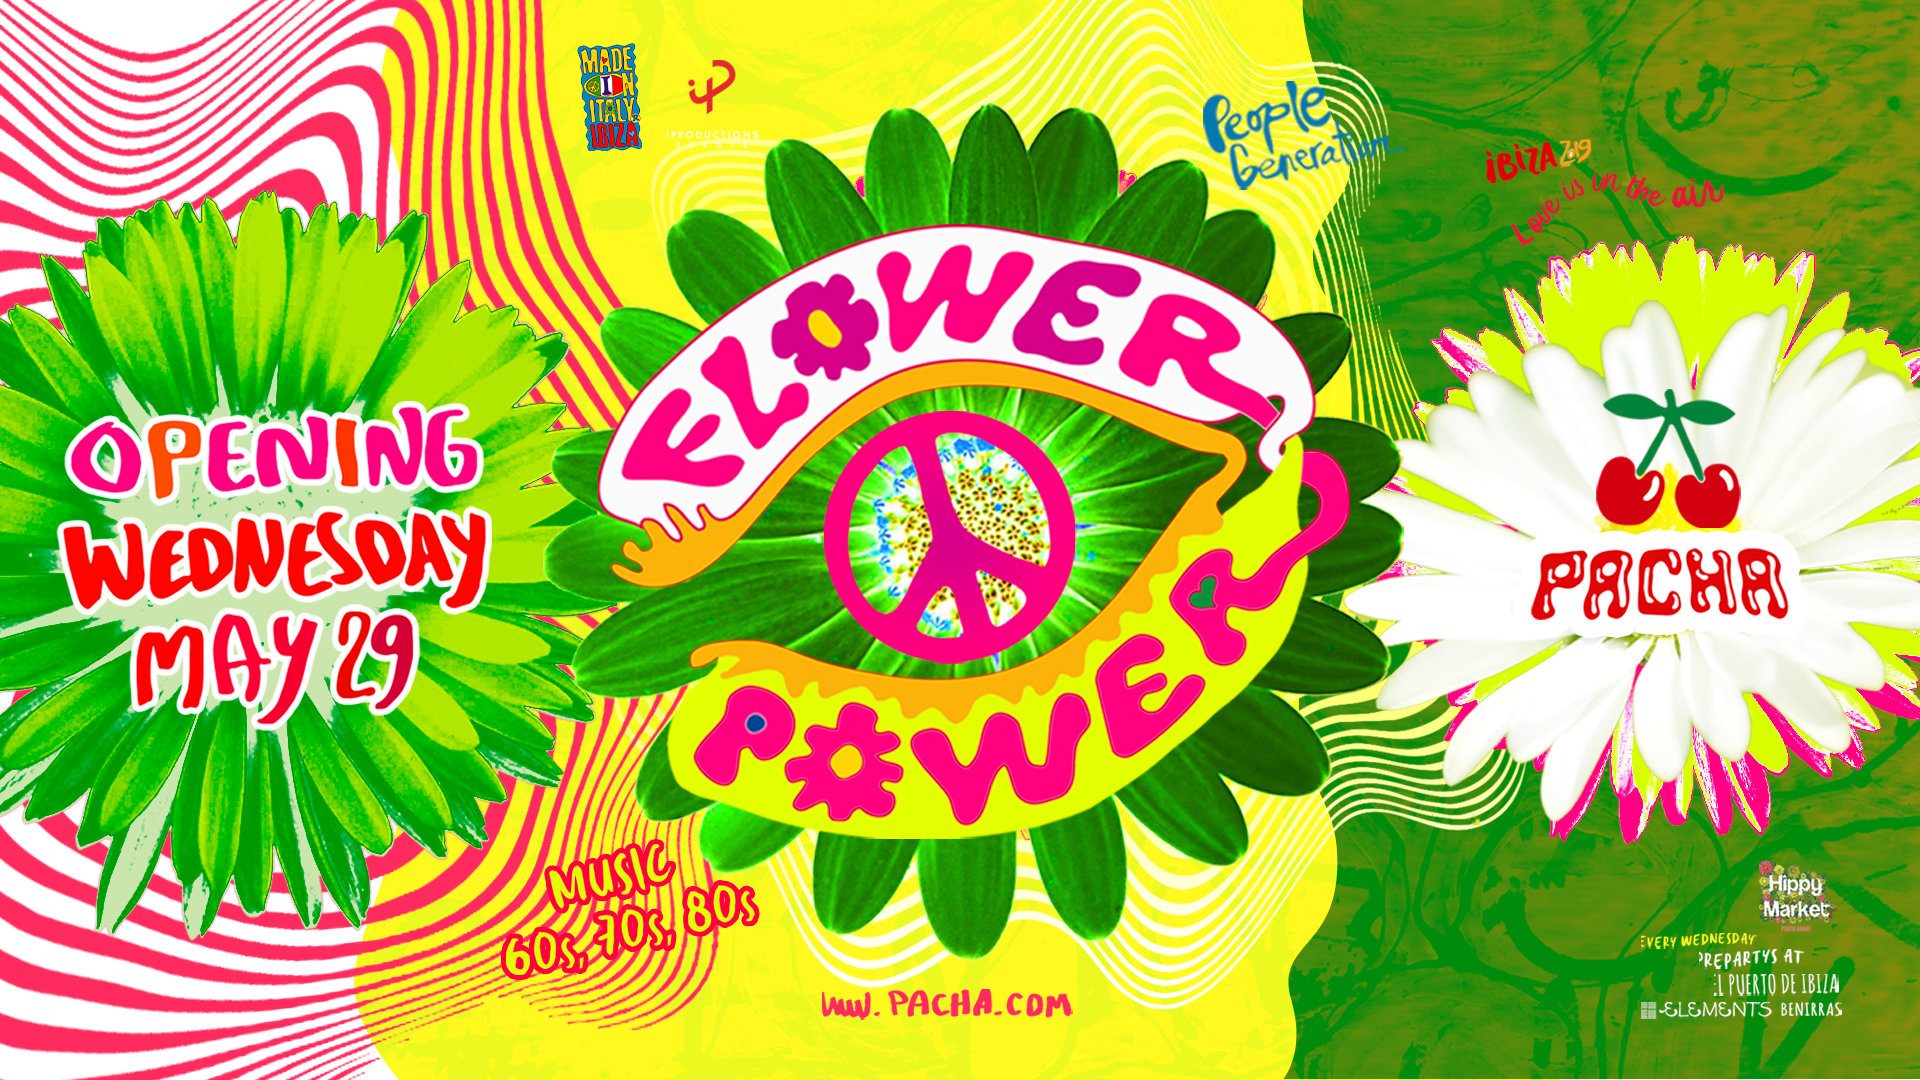 Flower Power at Pacha Ibiza: the opening party 2019! | Ibiza by night